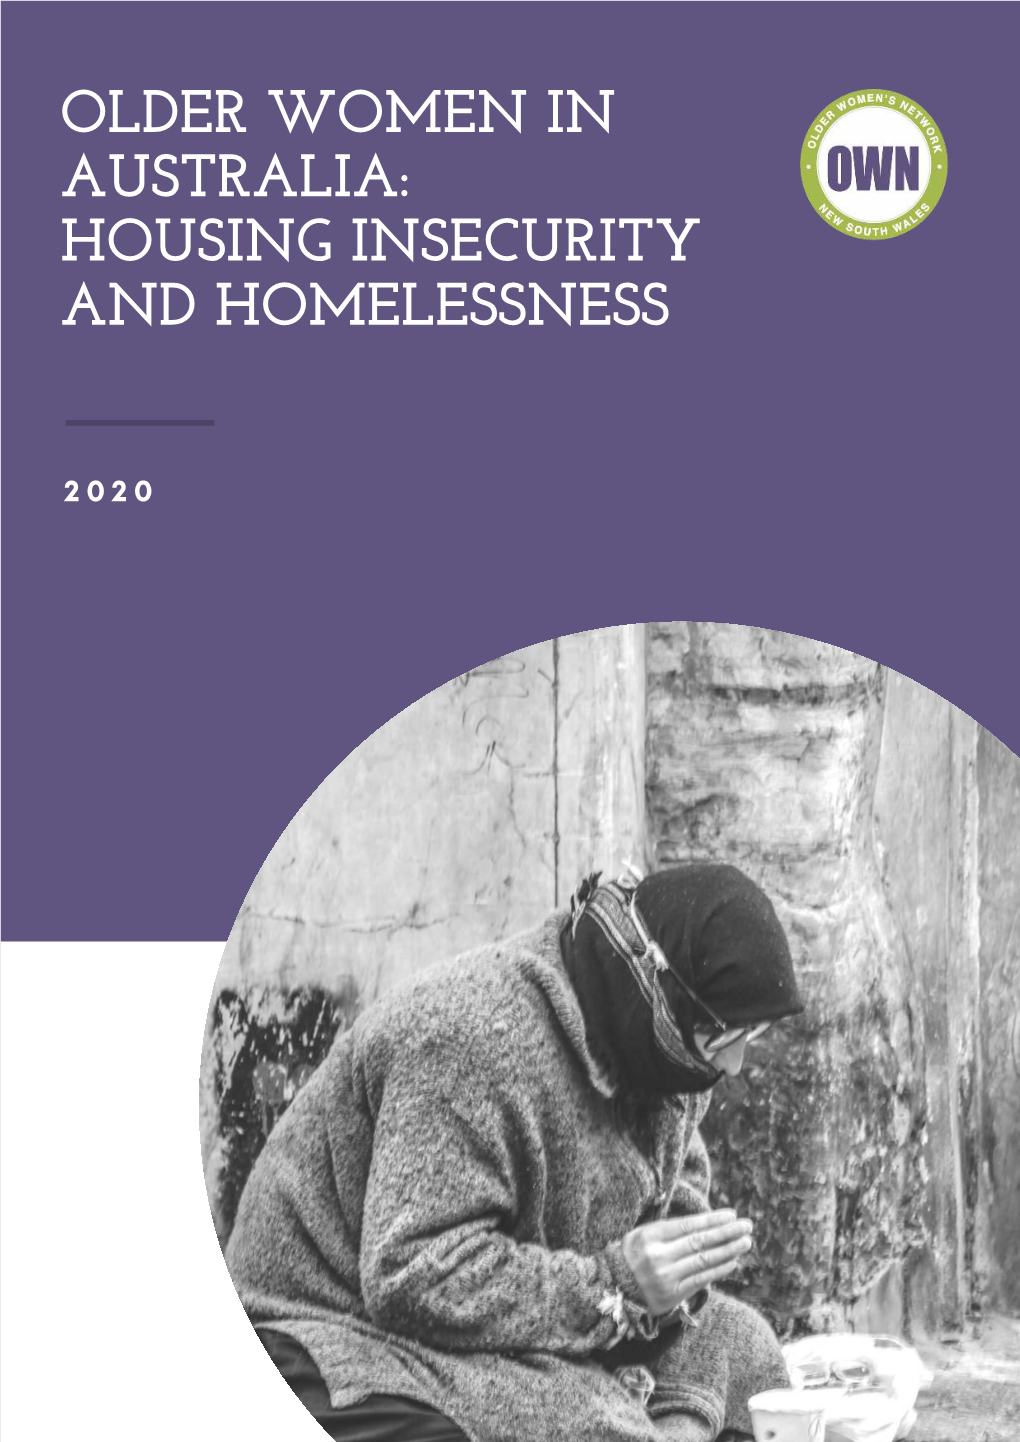 Housing Insecurity and Homelessness